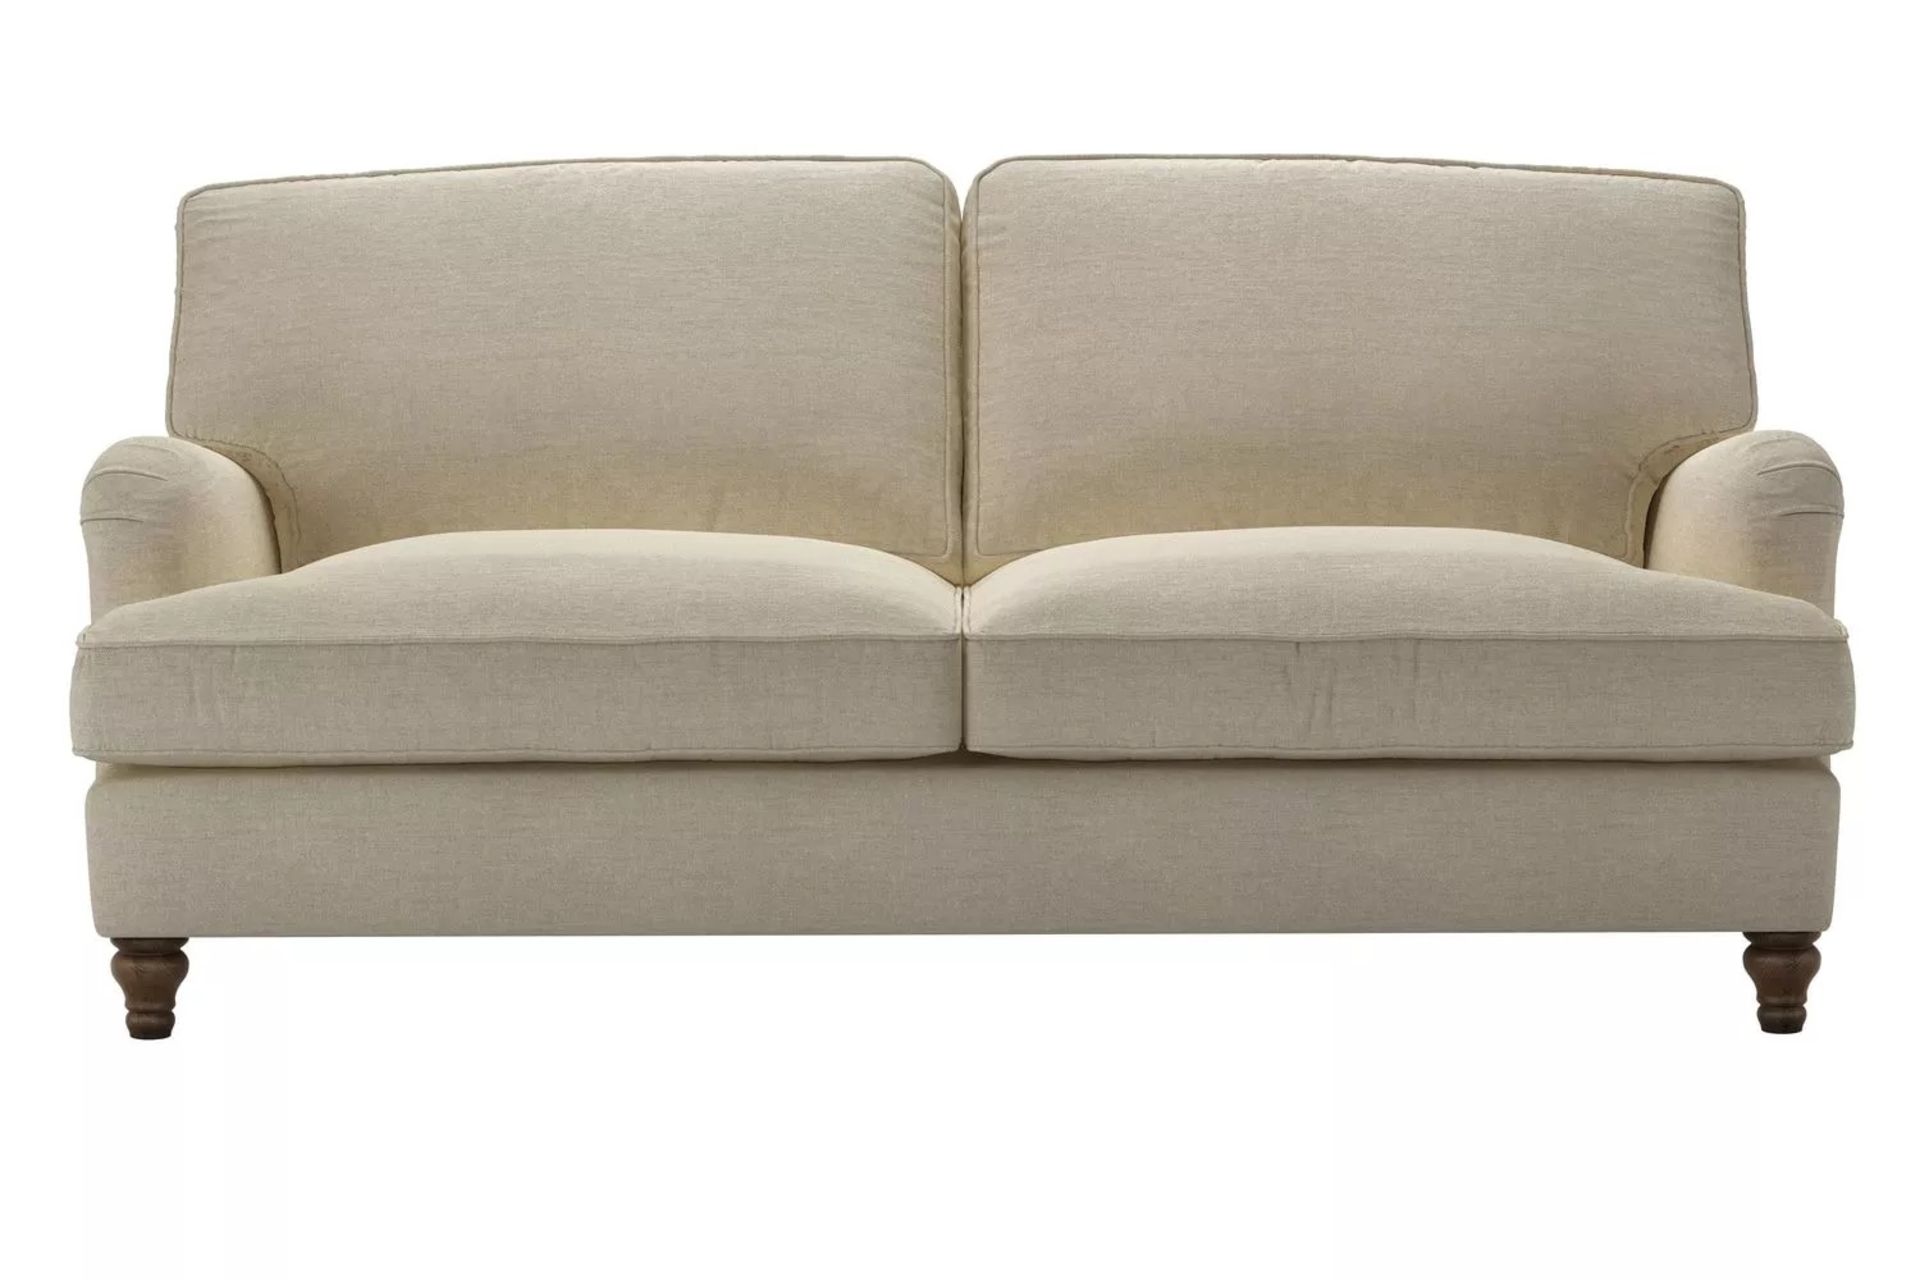 Bluebell 3 Seat Sofa Bed In Pampas Hygge Smart Linen RRP - £3310